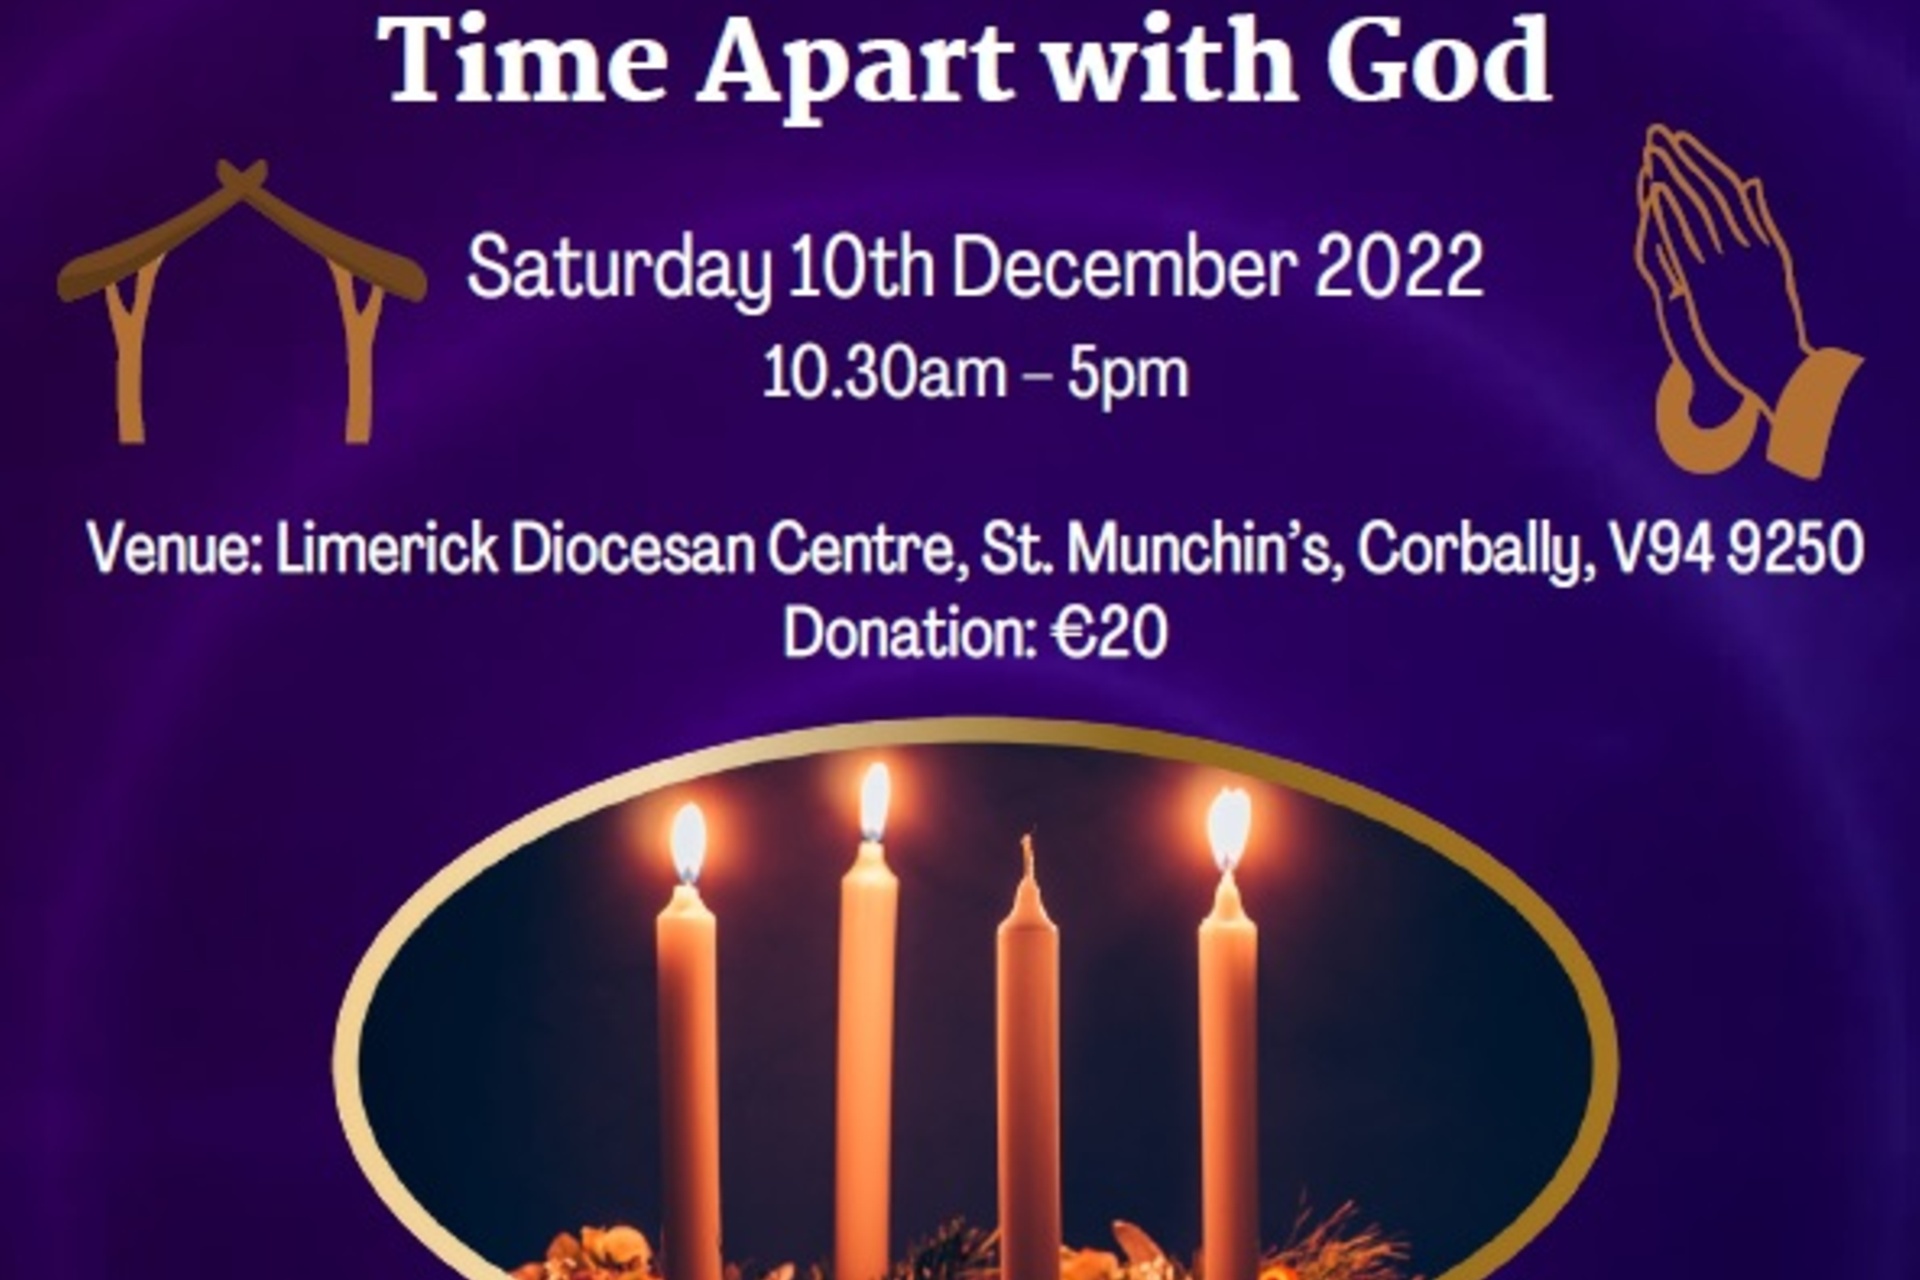 Advent Desert Day in Limerick Diocesan Centre